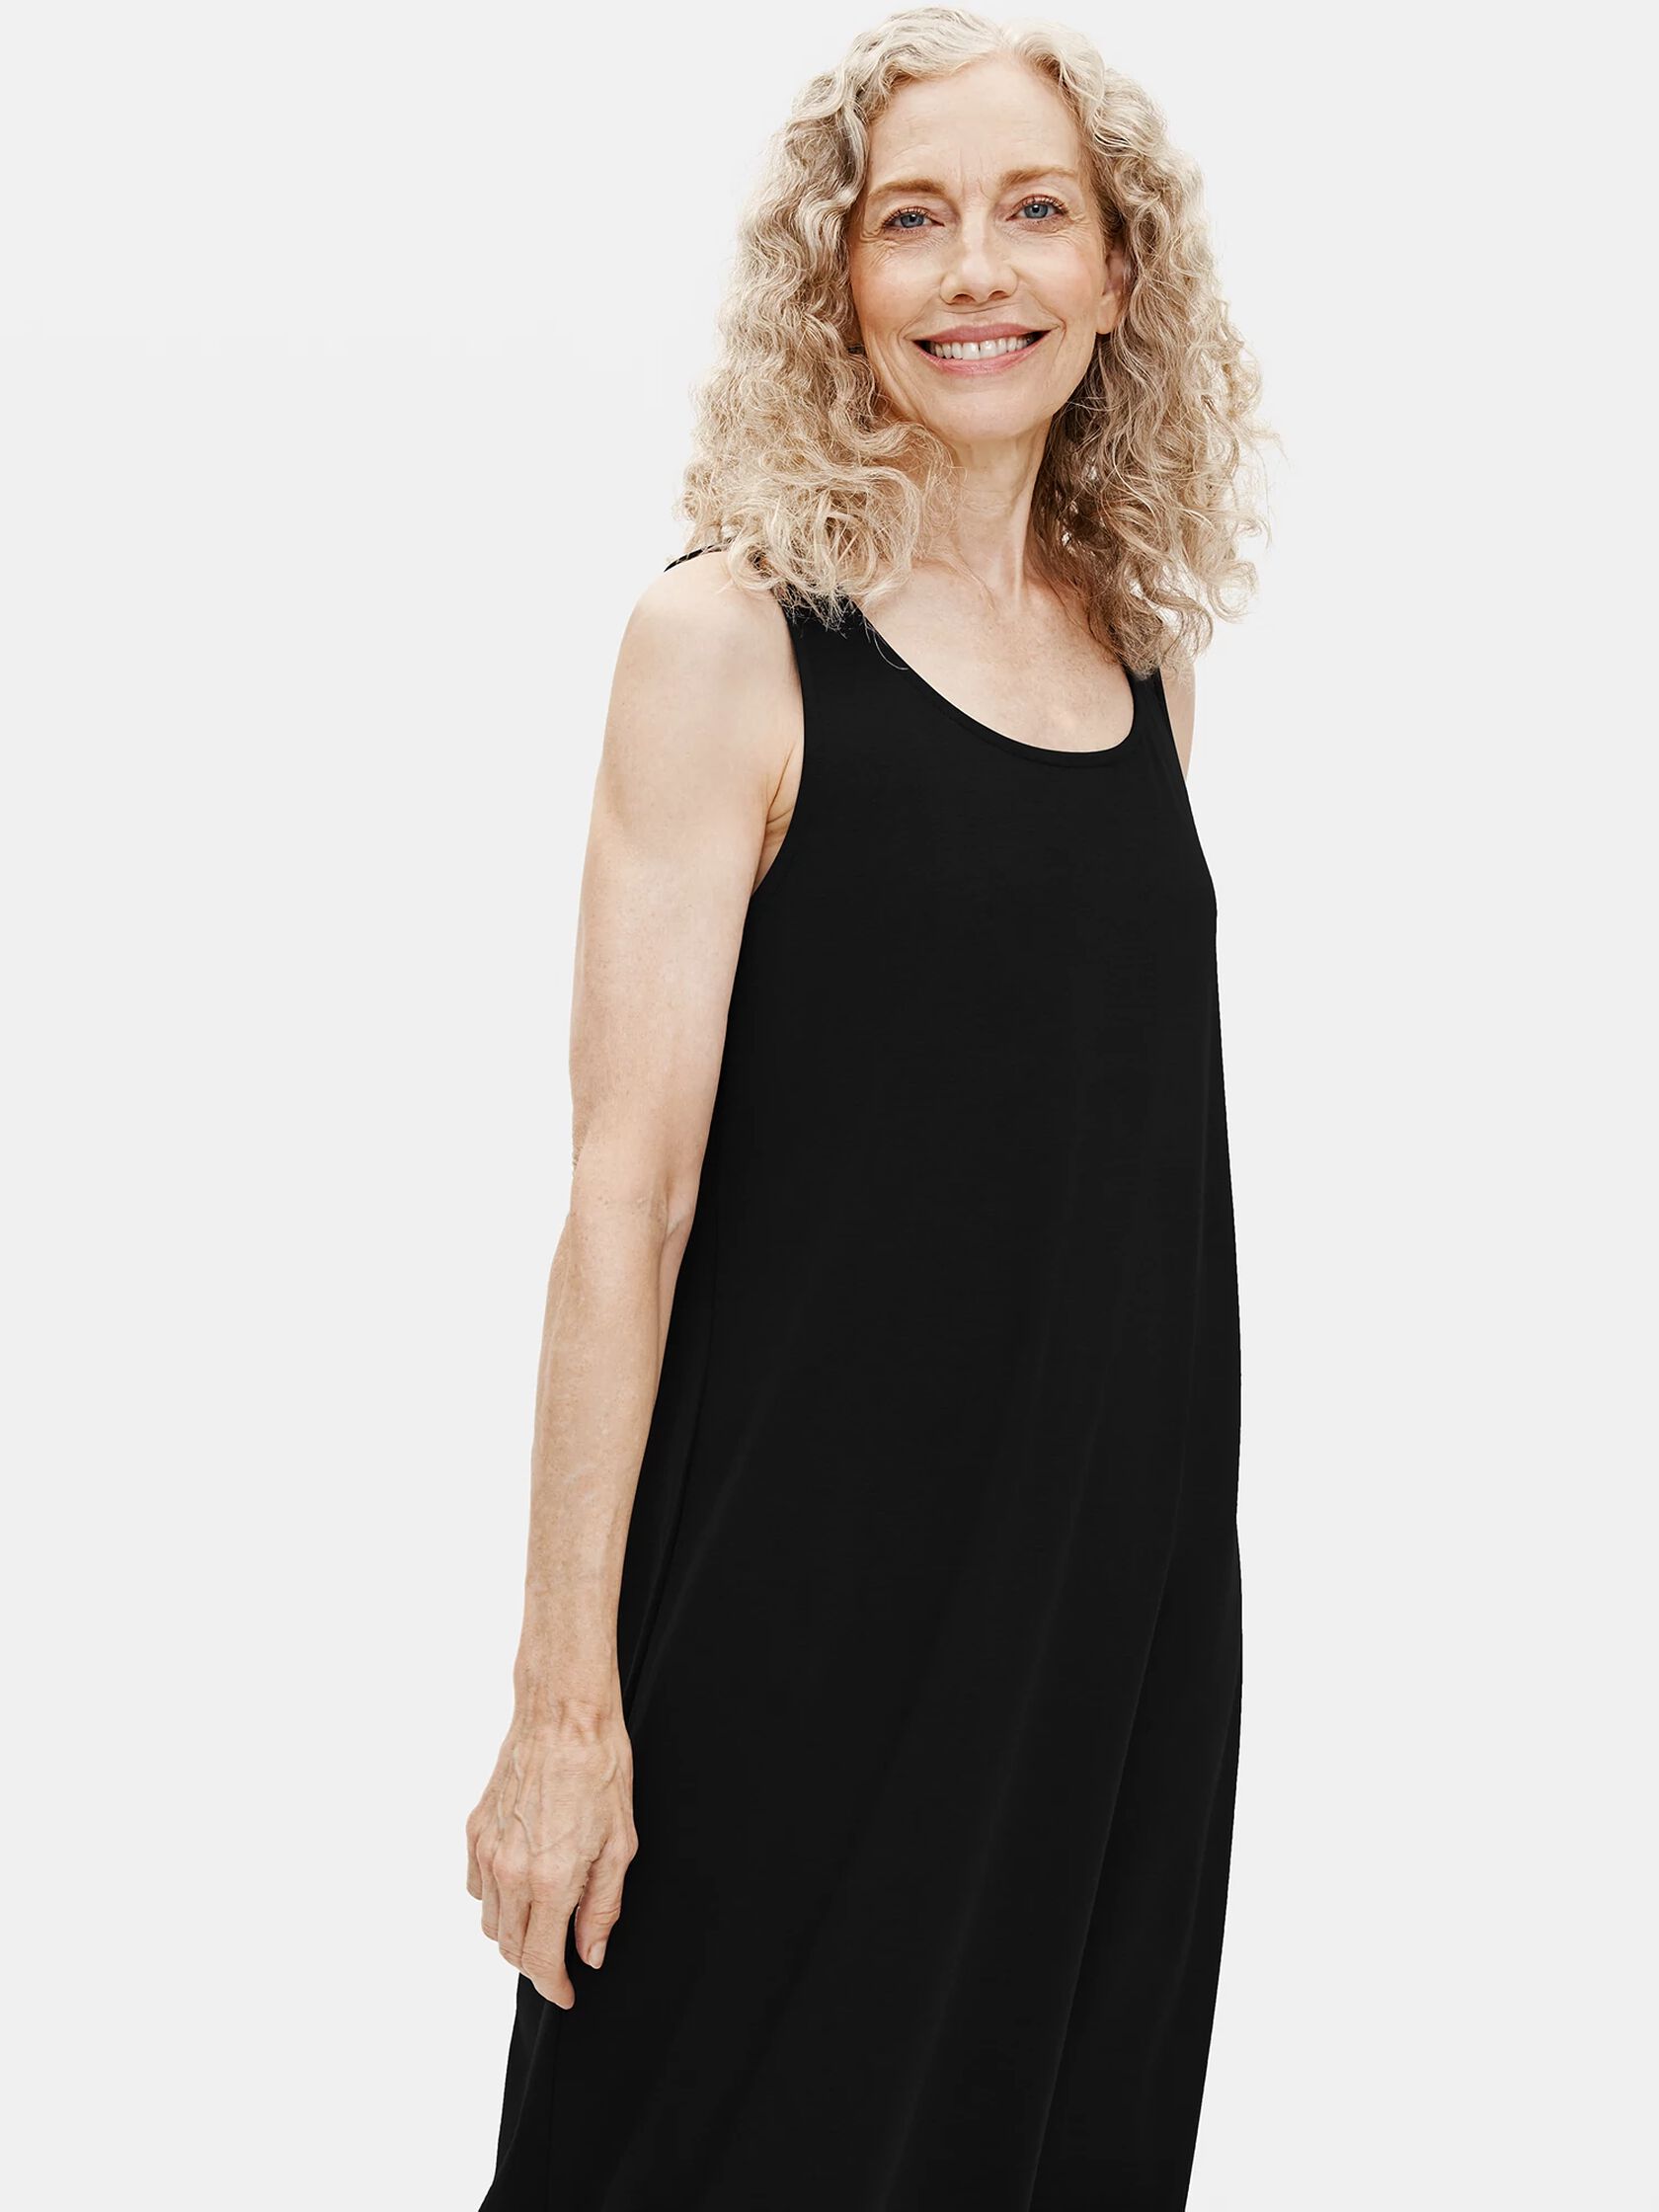 A model in Eileen Fisher sustainable fashion